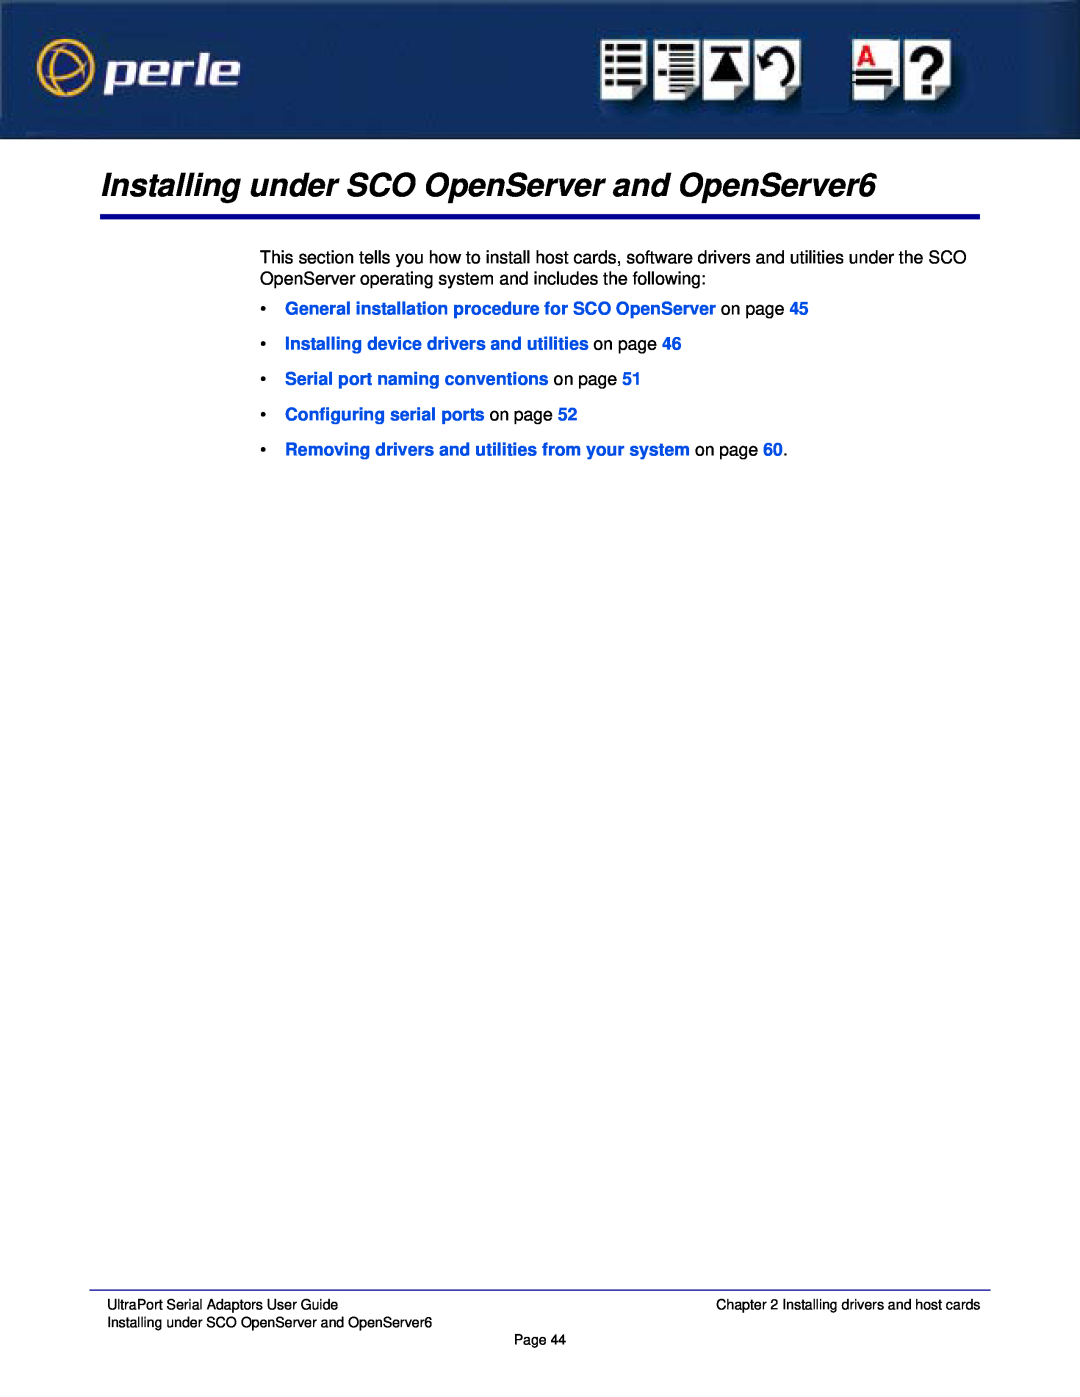 Perle Systems 5500152-23 Installing under SCO OpenServer and OpenServer6, Installing device drivers and utilities on page 